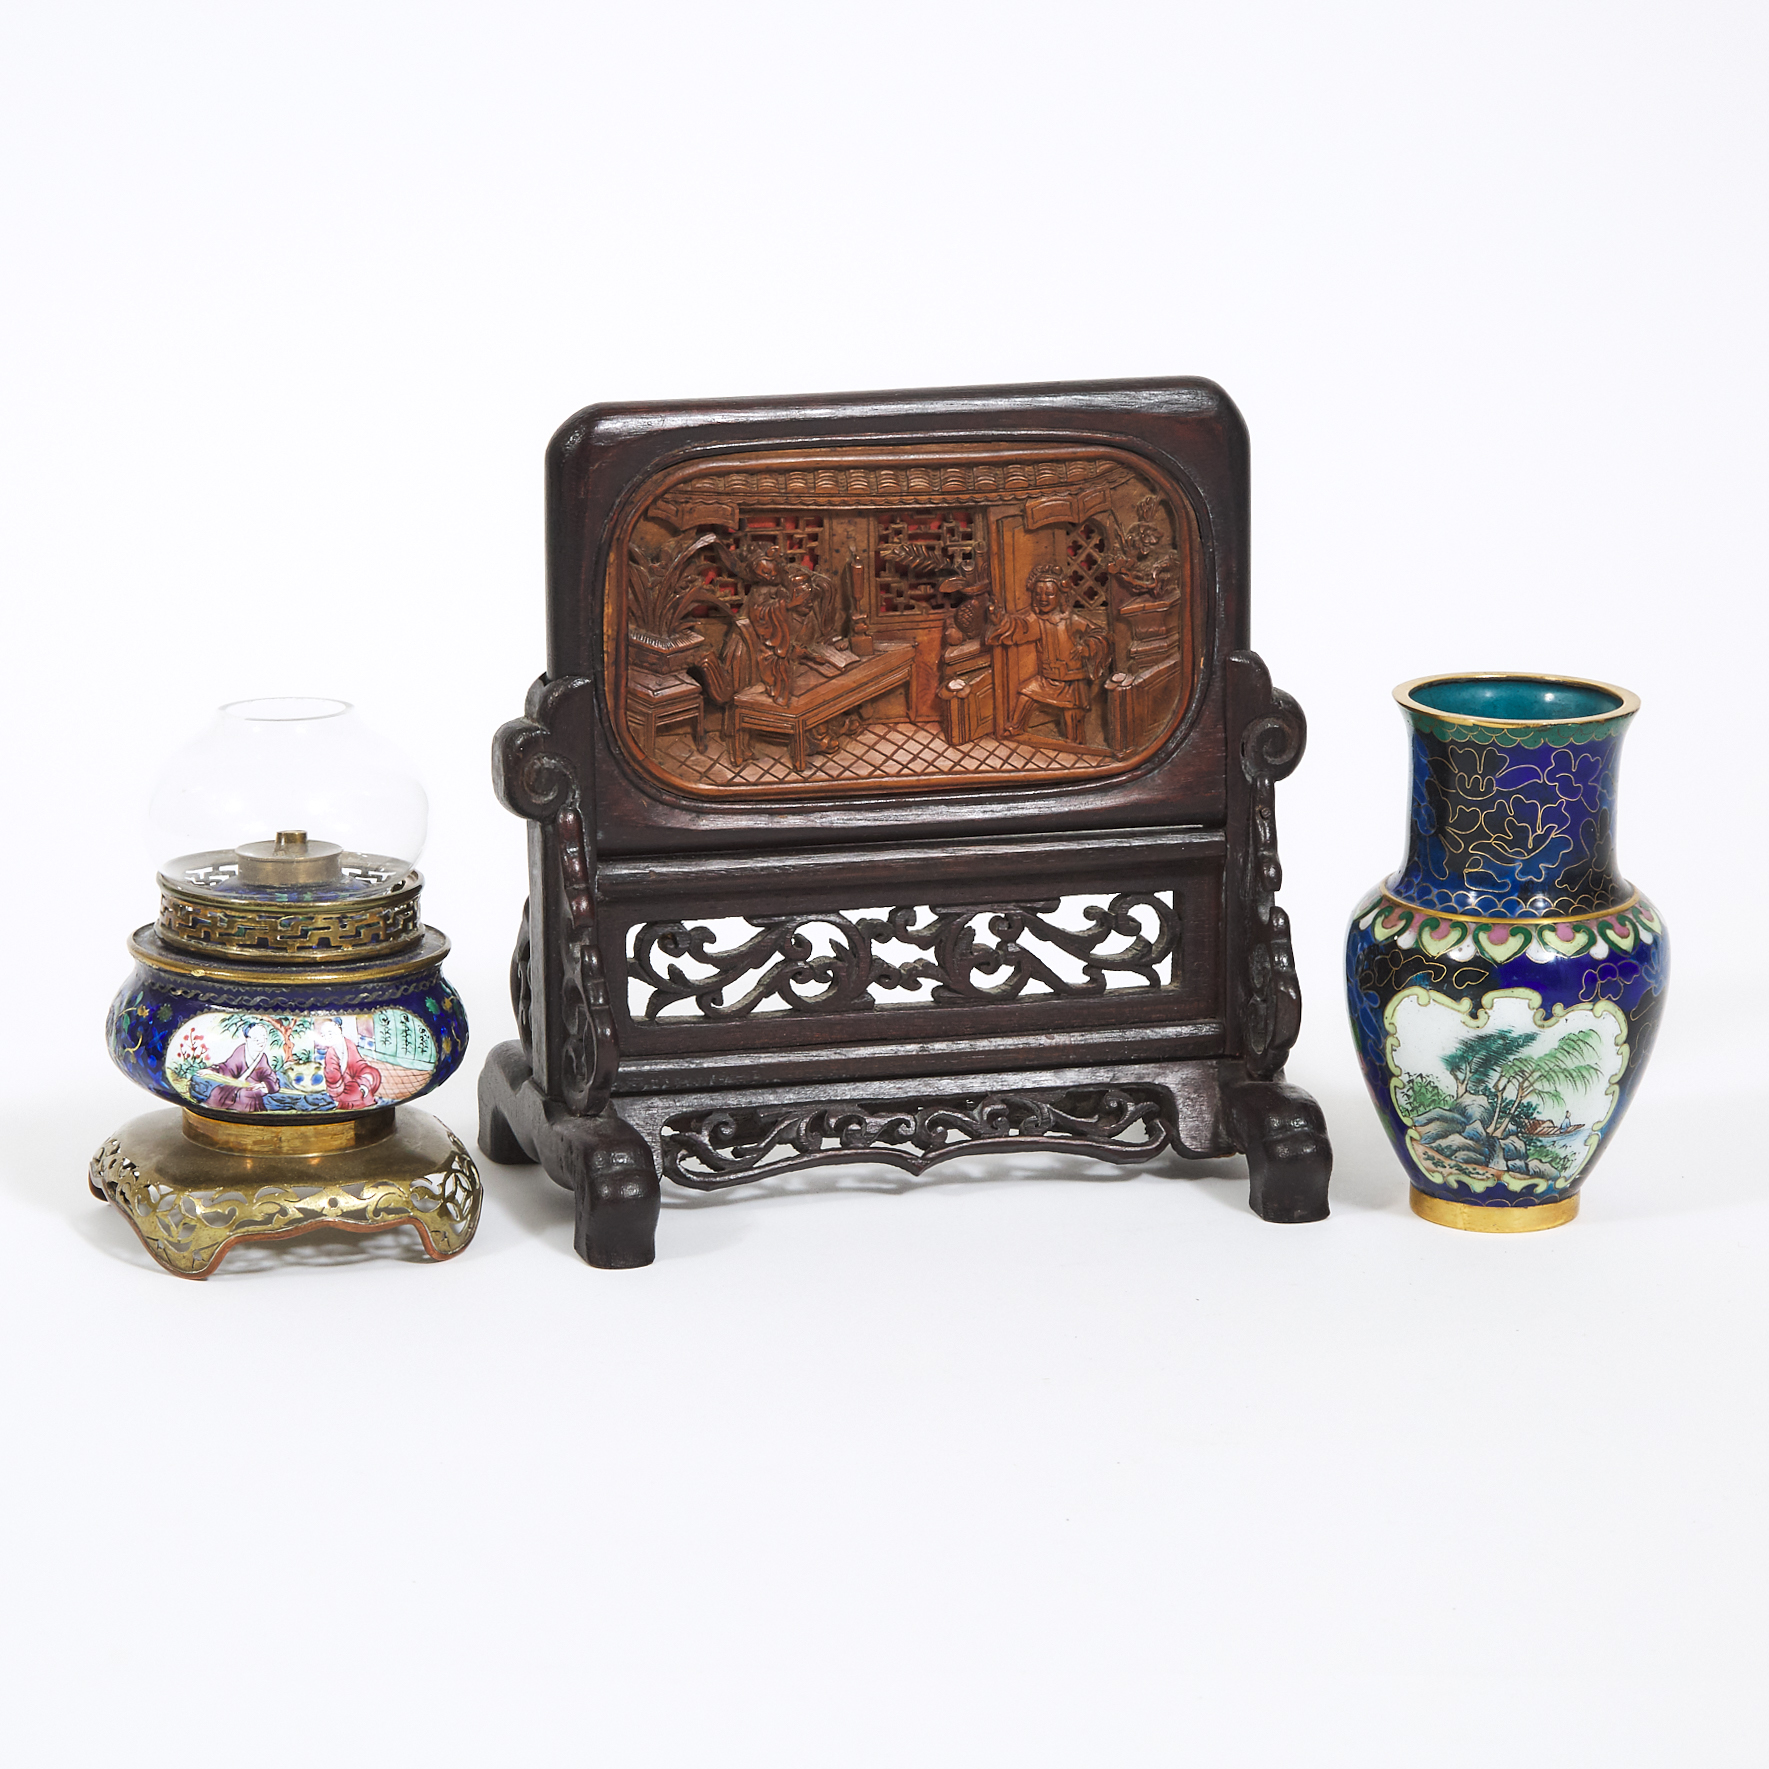 A Group of Three Chinese Export Items, 19th Century